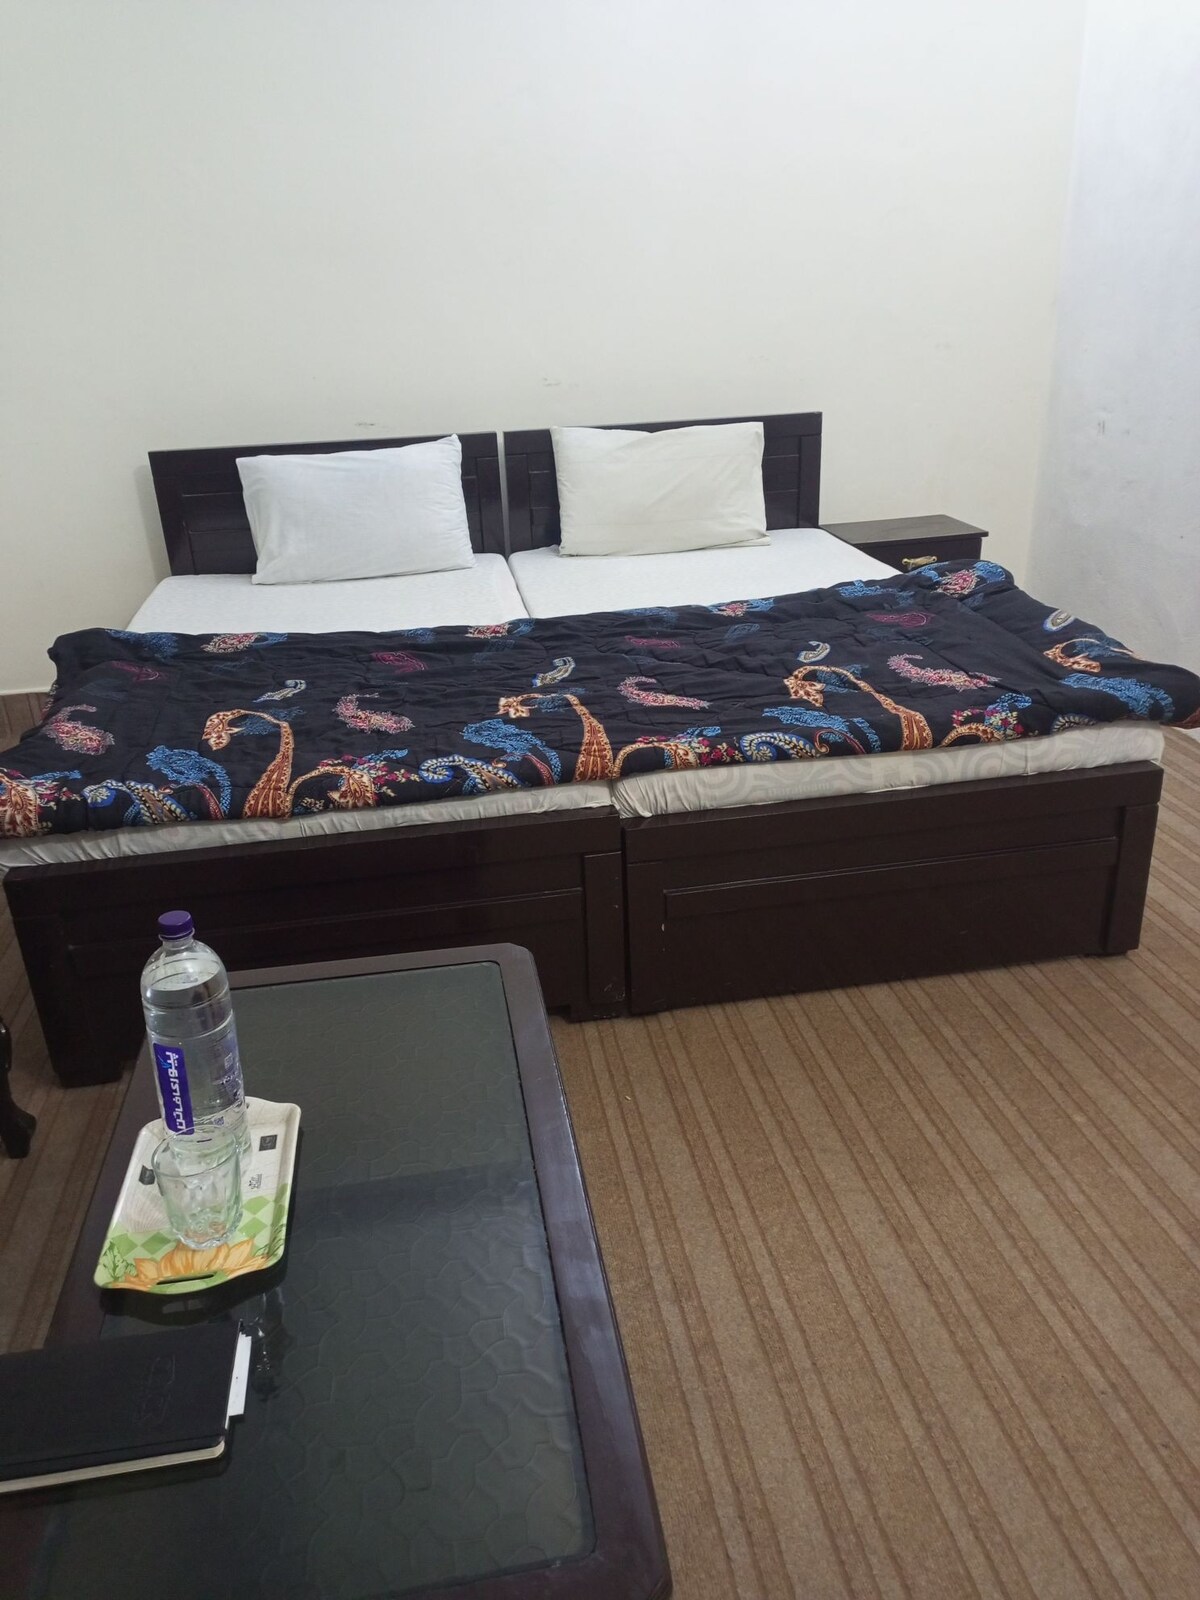 Room Wait For You Book Now!.